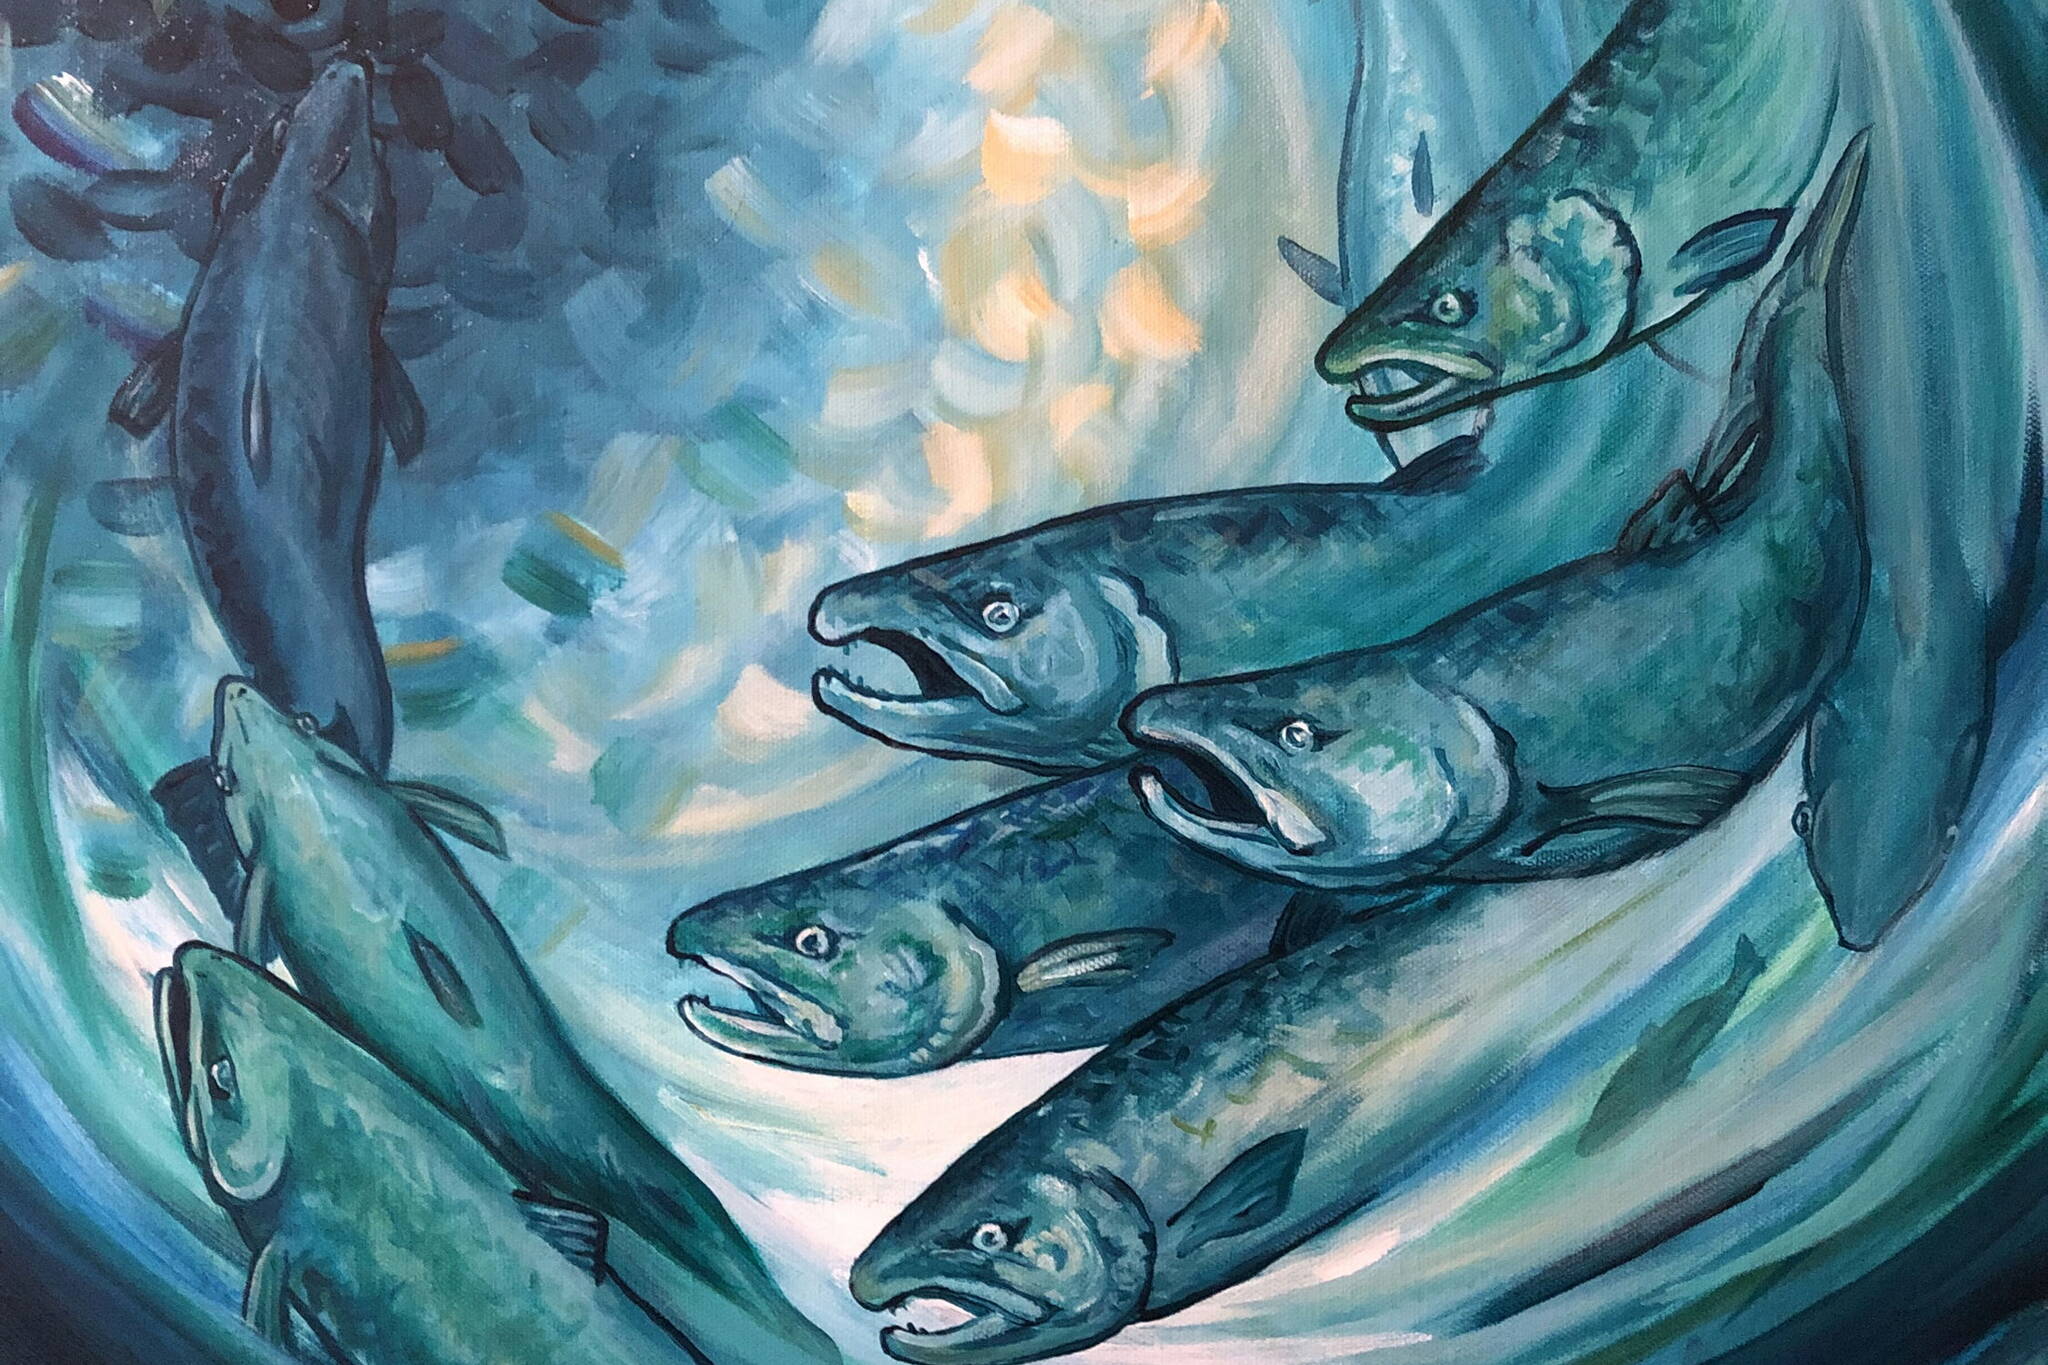 Acrylic works by local artist Jessalyn Ward will be featured at Bustin Out Boutique as part of November’s First Friday in Juneau. (Courtesy of the Juneau Arts and Humanities Council)